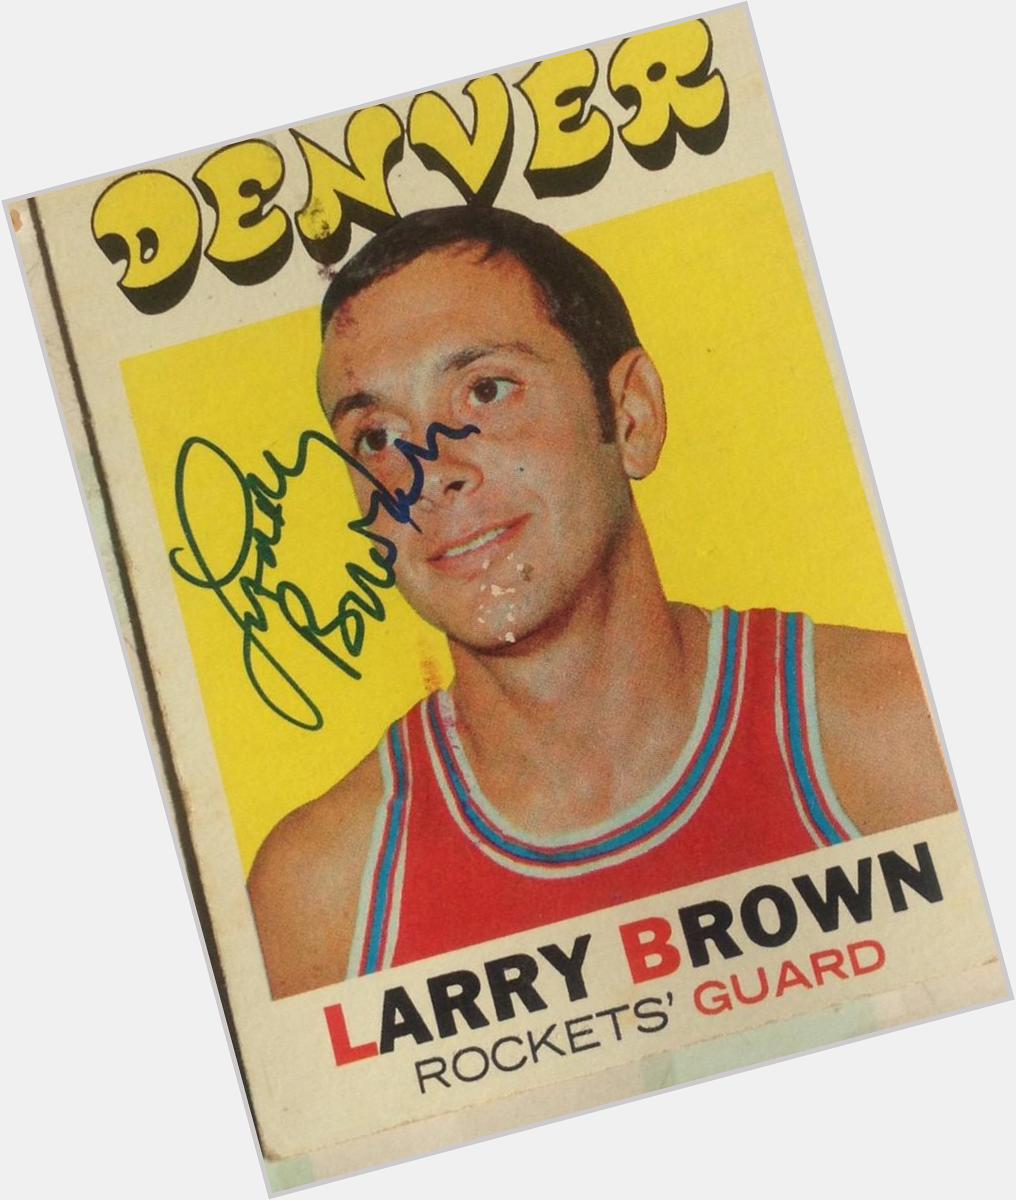   Happy 75th birthday to Larry Brown. 